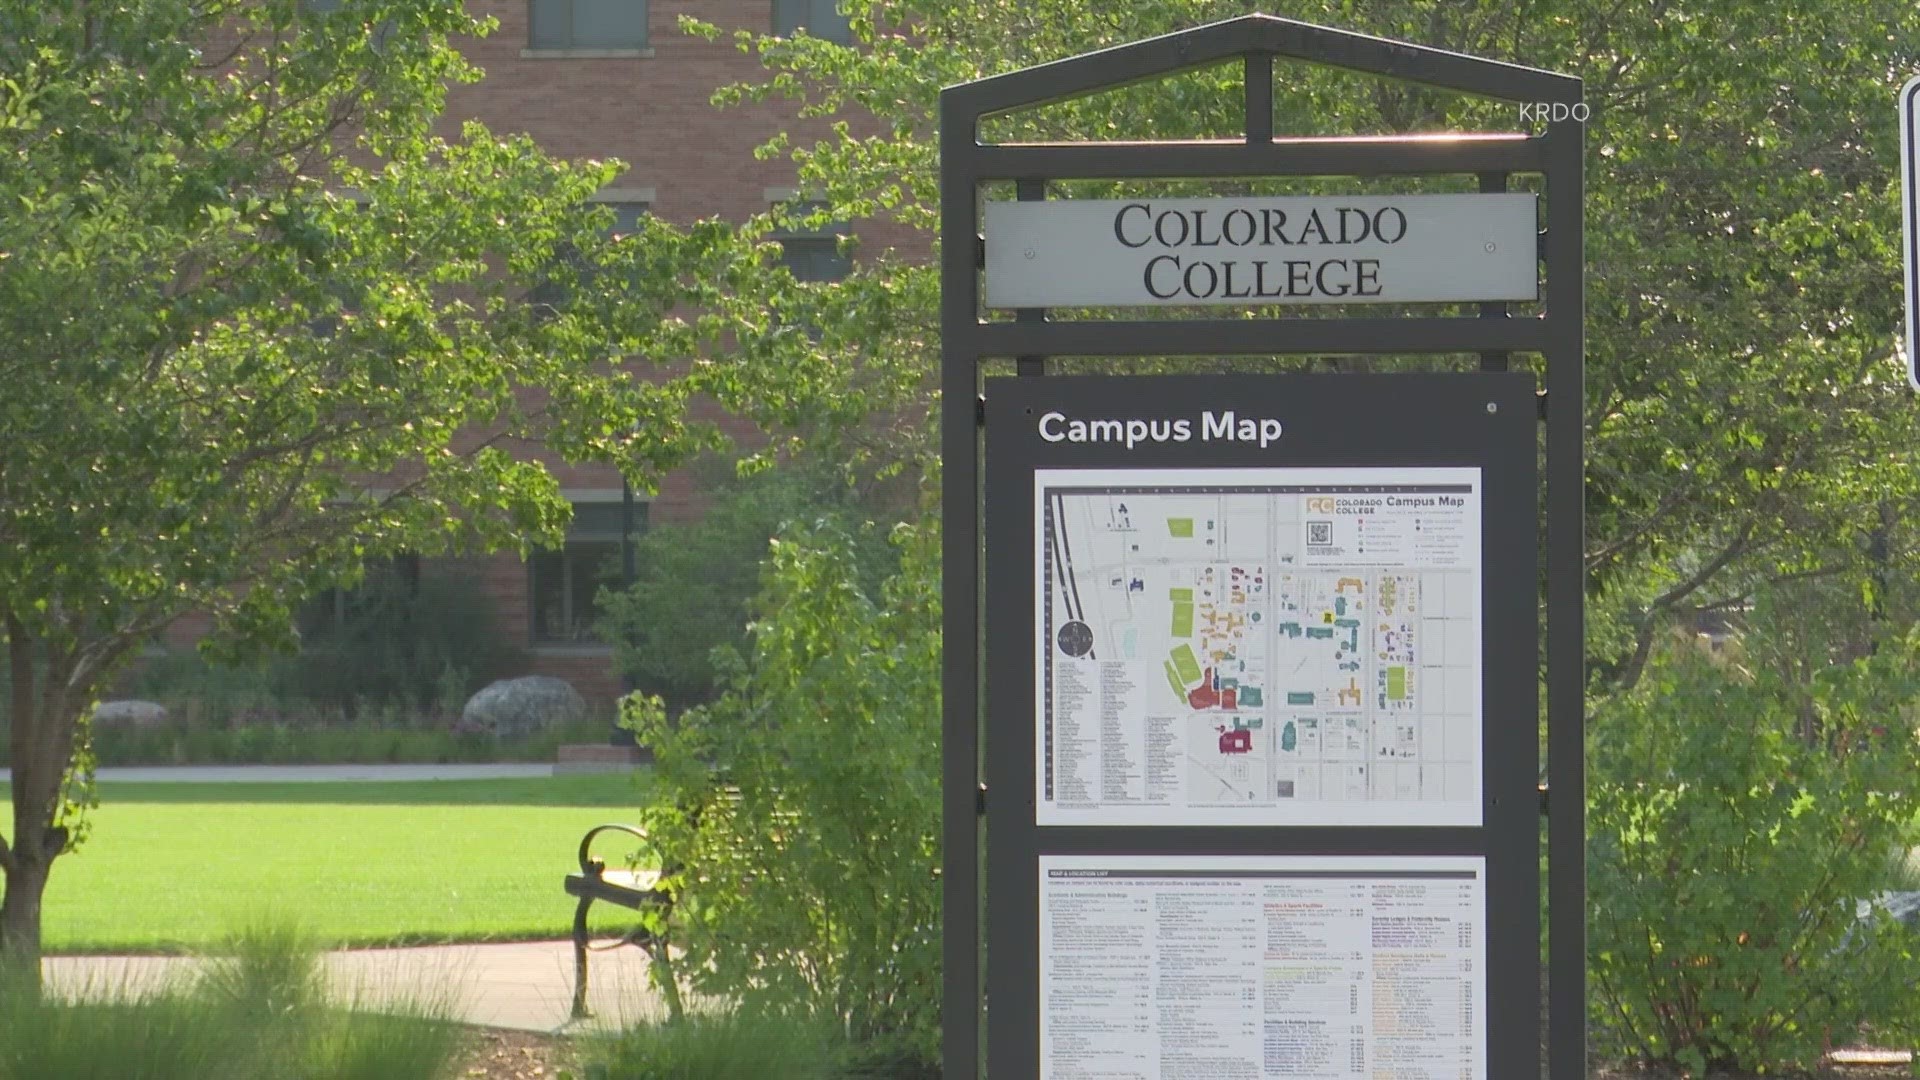 Colorado College started this first-of-its-kind initiative in response to states passing laws against Diversity, Equity and Inclusion policies.